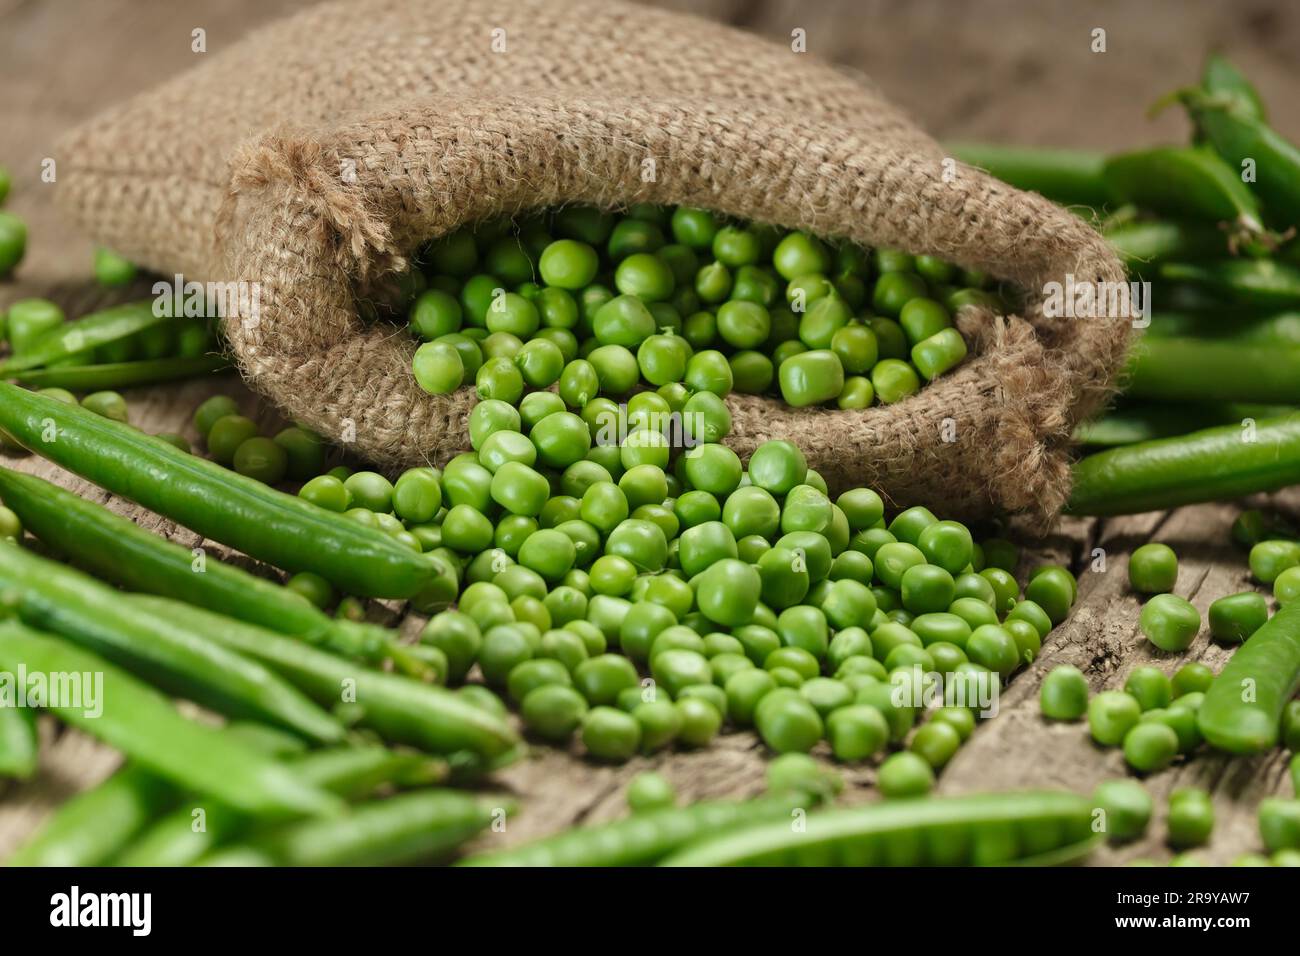 Fresh organic green peas in closed and open pods, scattered pea seeds, shelled green peas in a burlap bag on an aged wooden background. Stock Photo